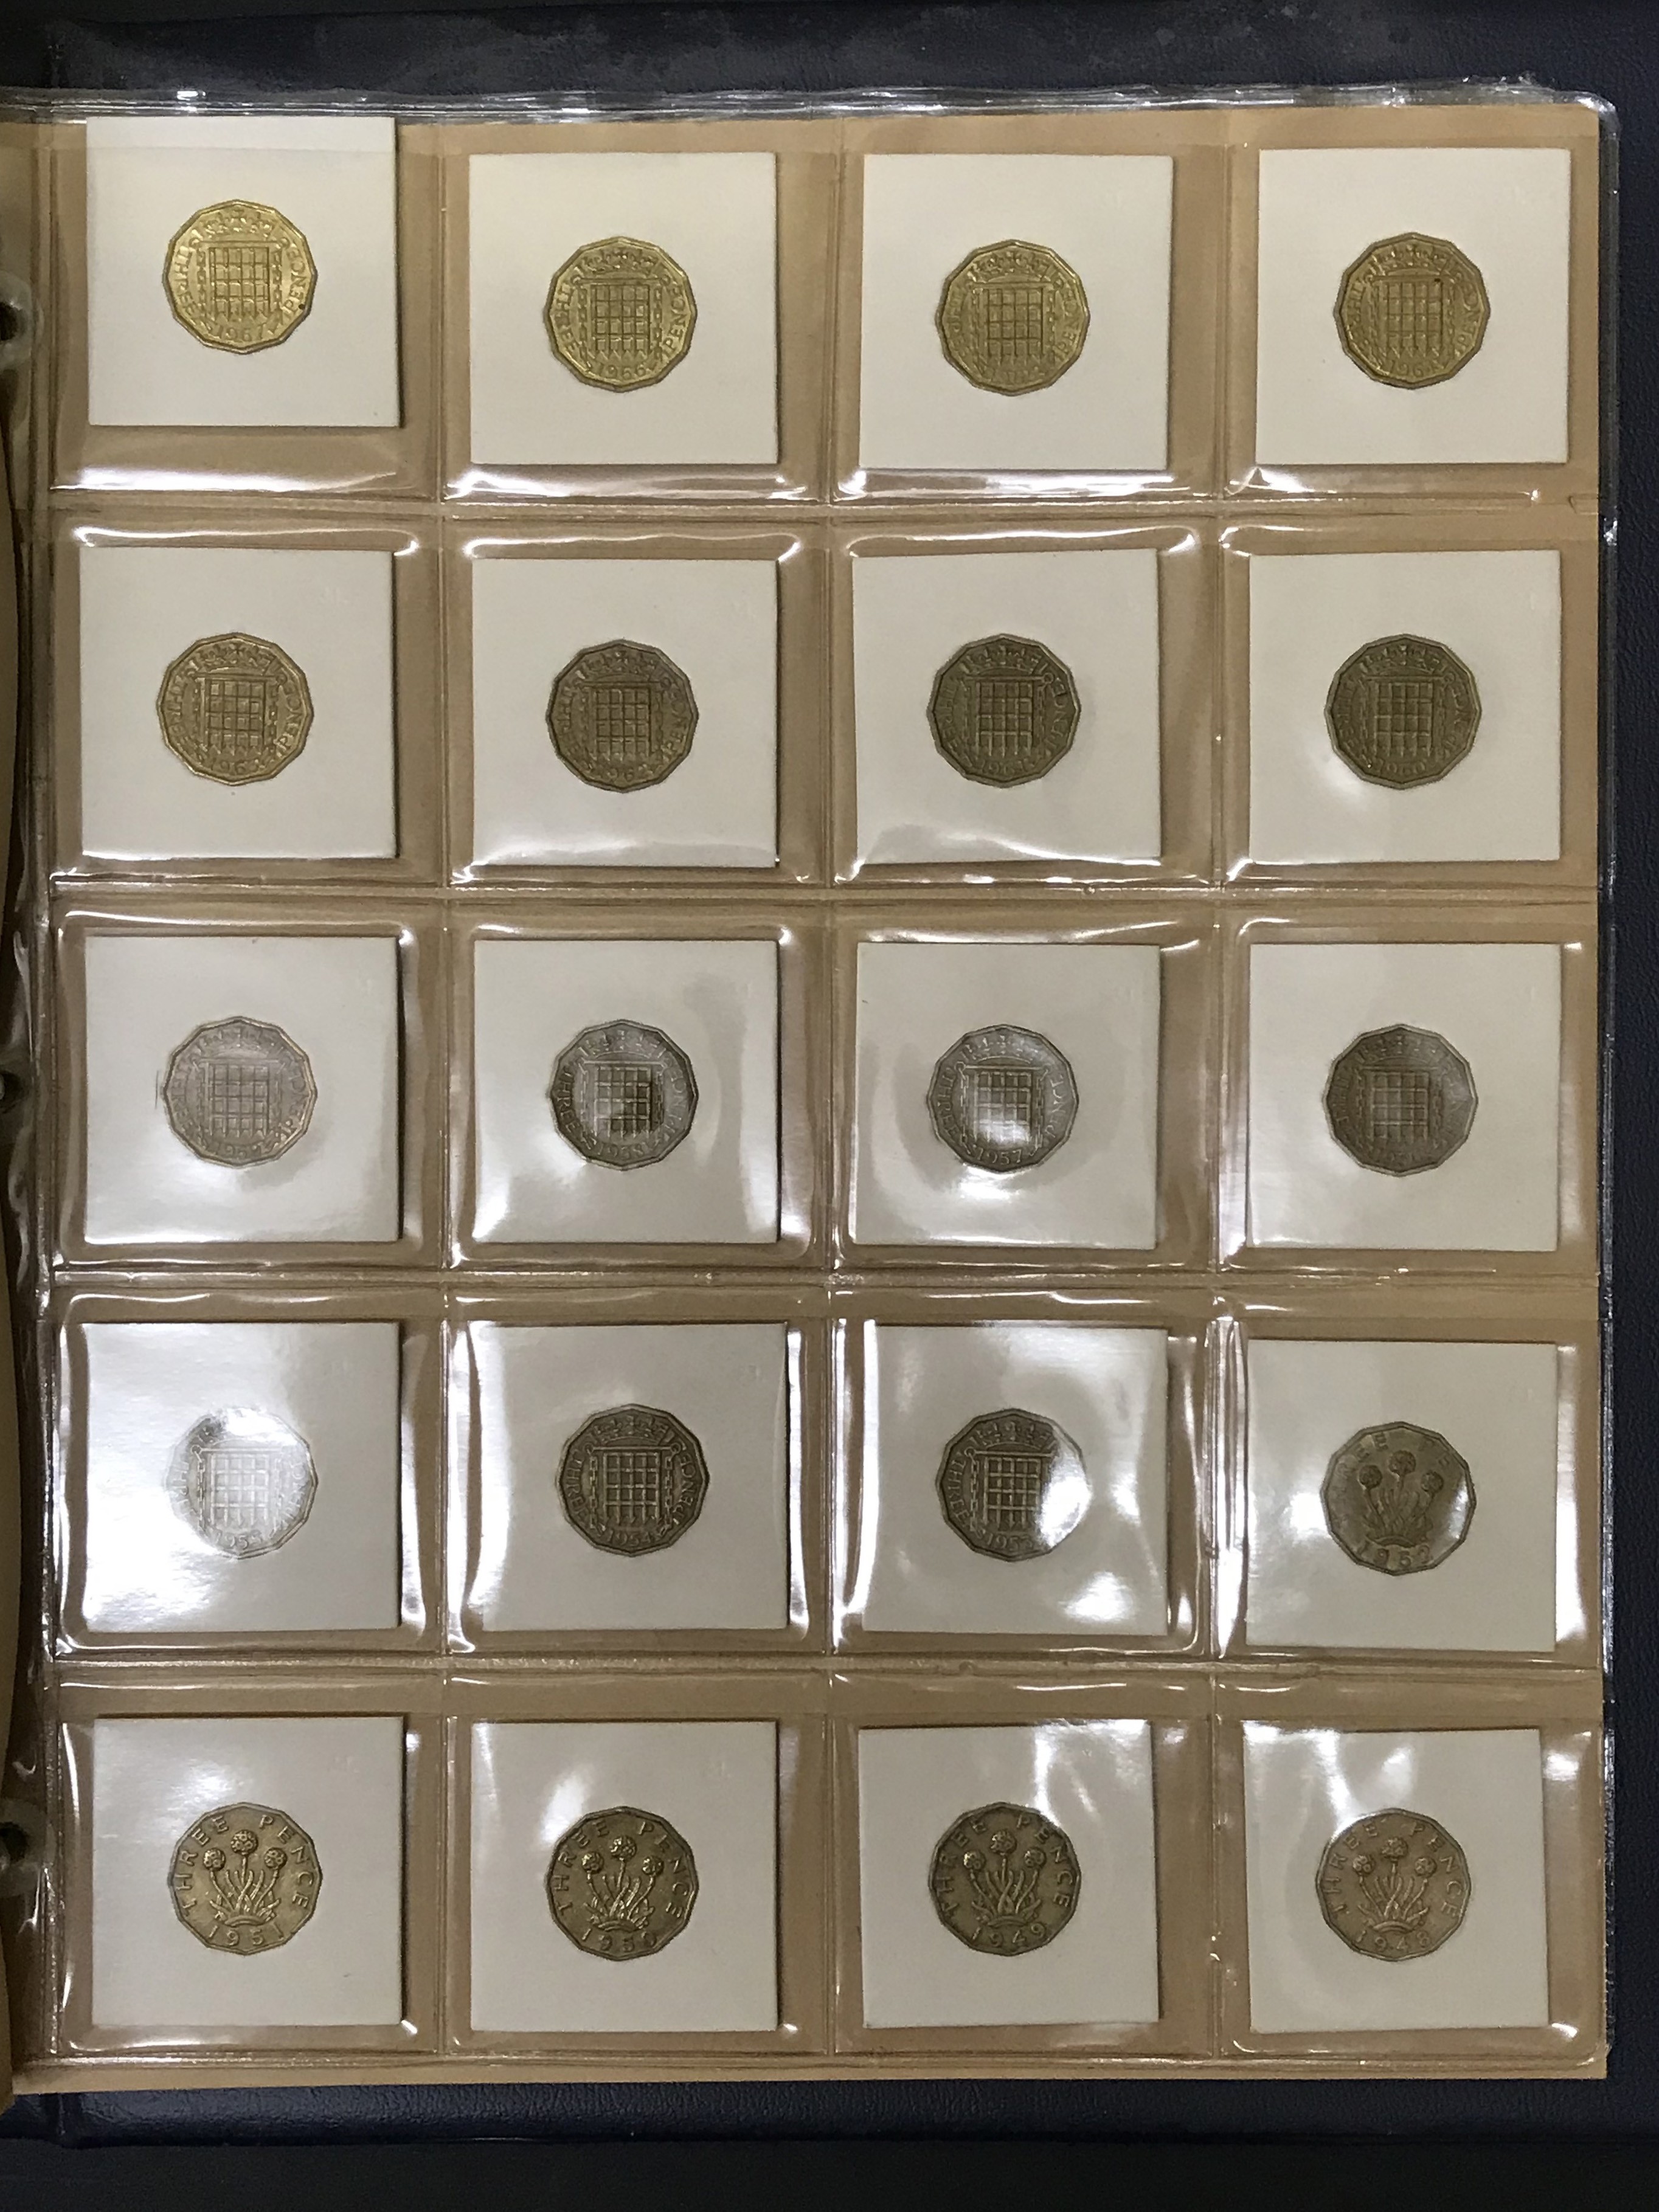 5 albums of coins including silver - Image 36 of 44